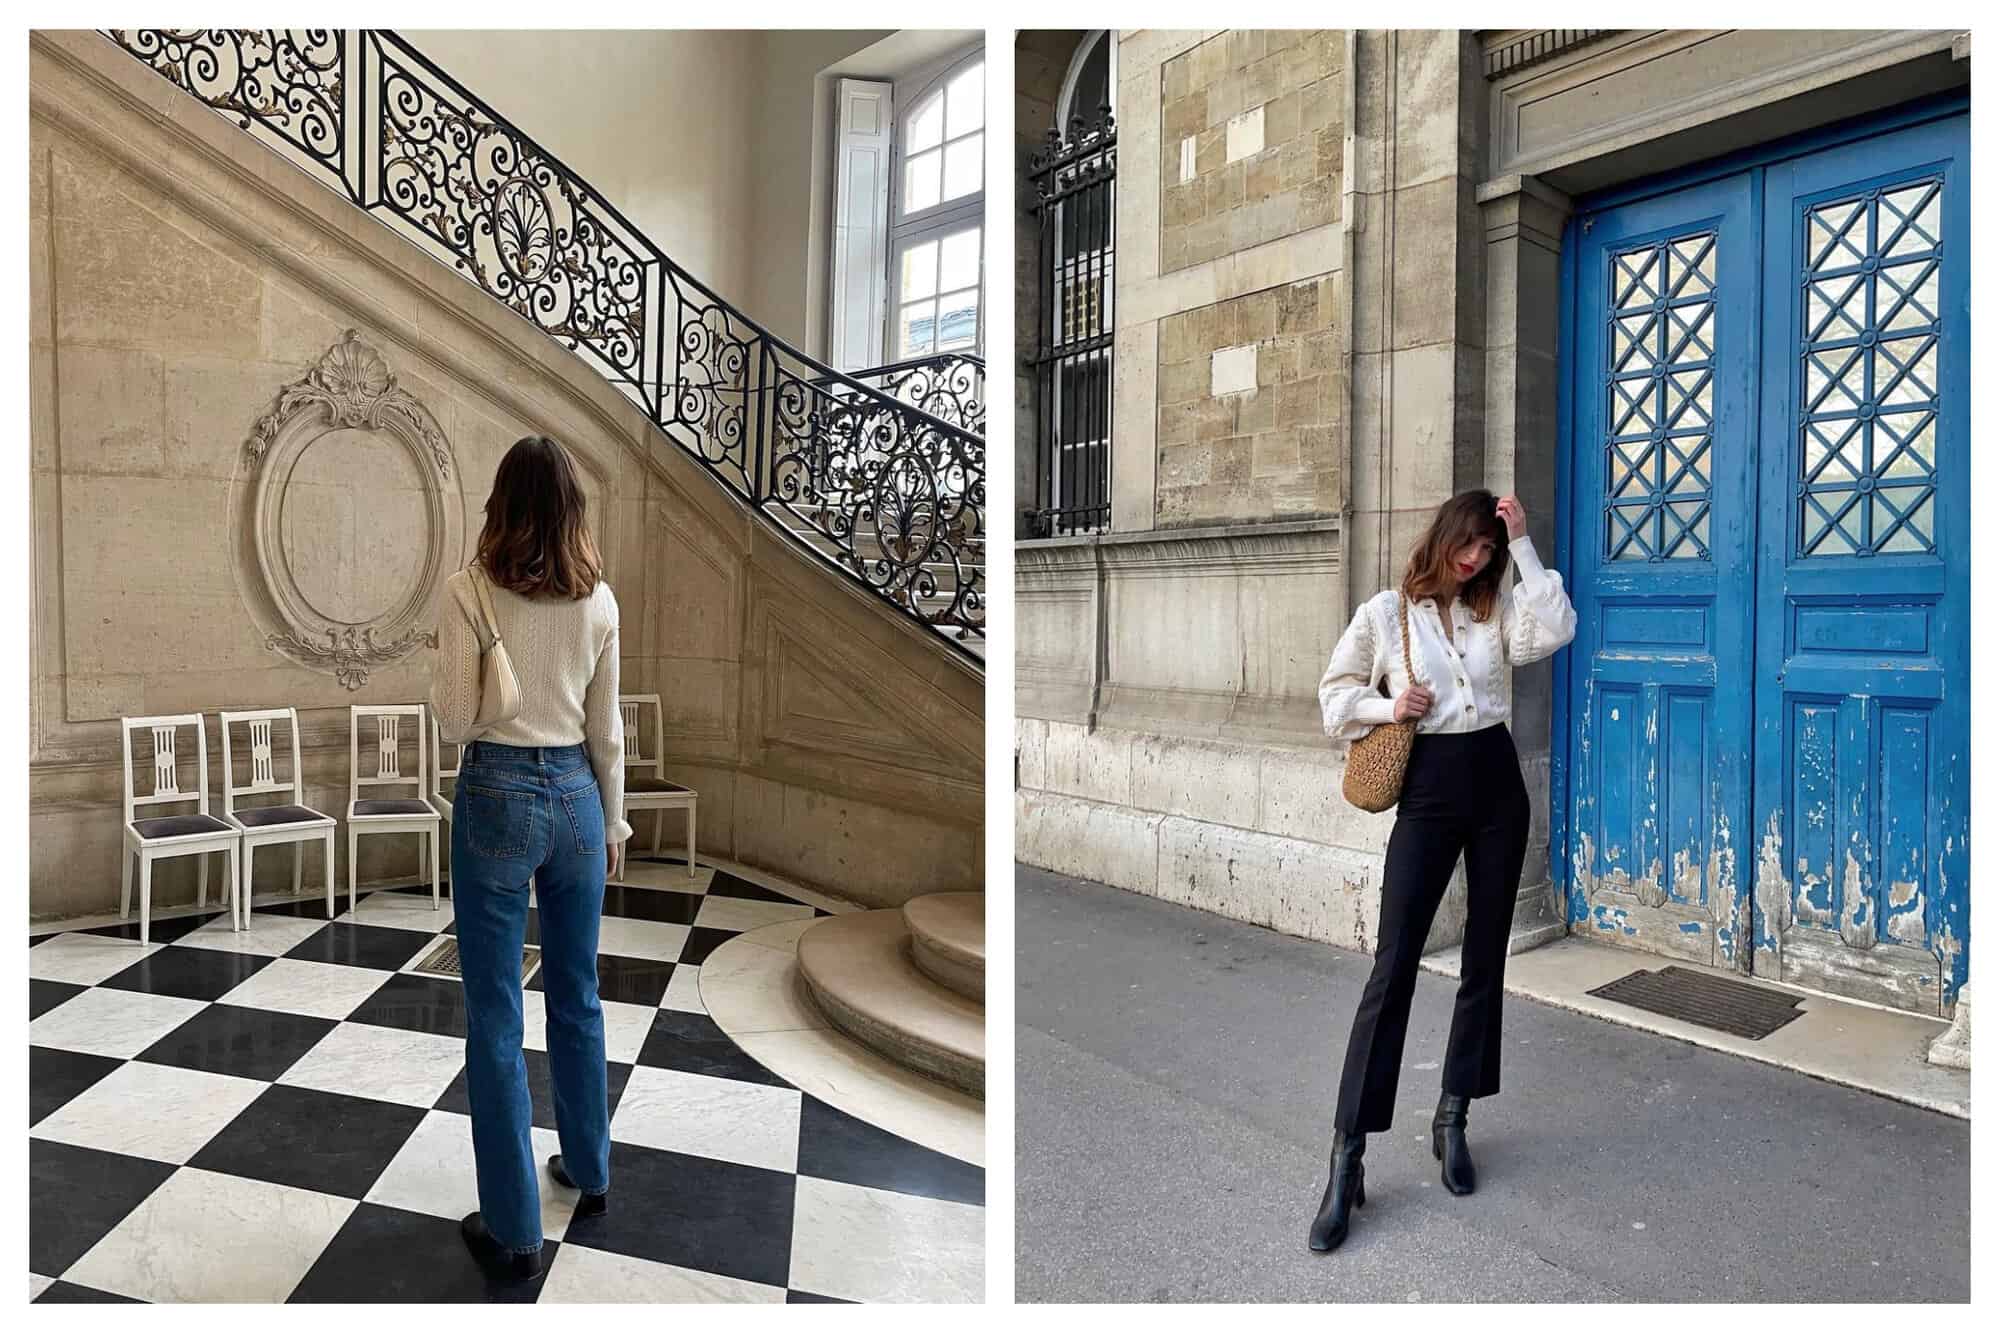 Left- A woman stands in jeans and a cream shirt on a black and white tiled floor. 
Right- A woman stands in front of a blue door in Paris. She wears black trousers and a cream sweater. 